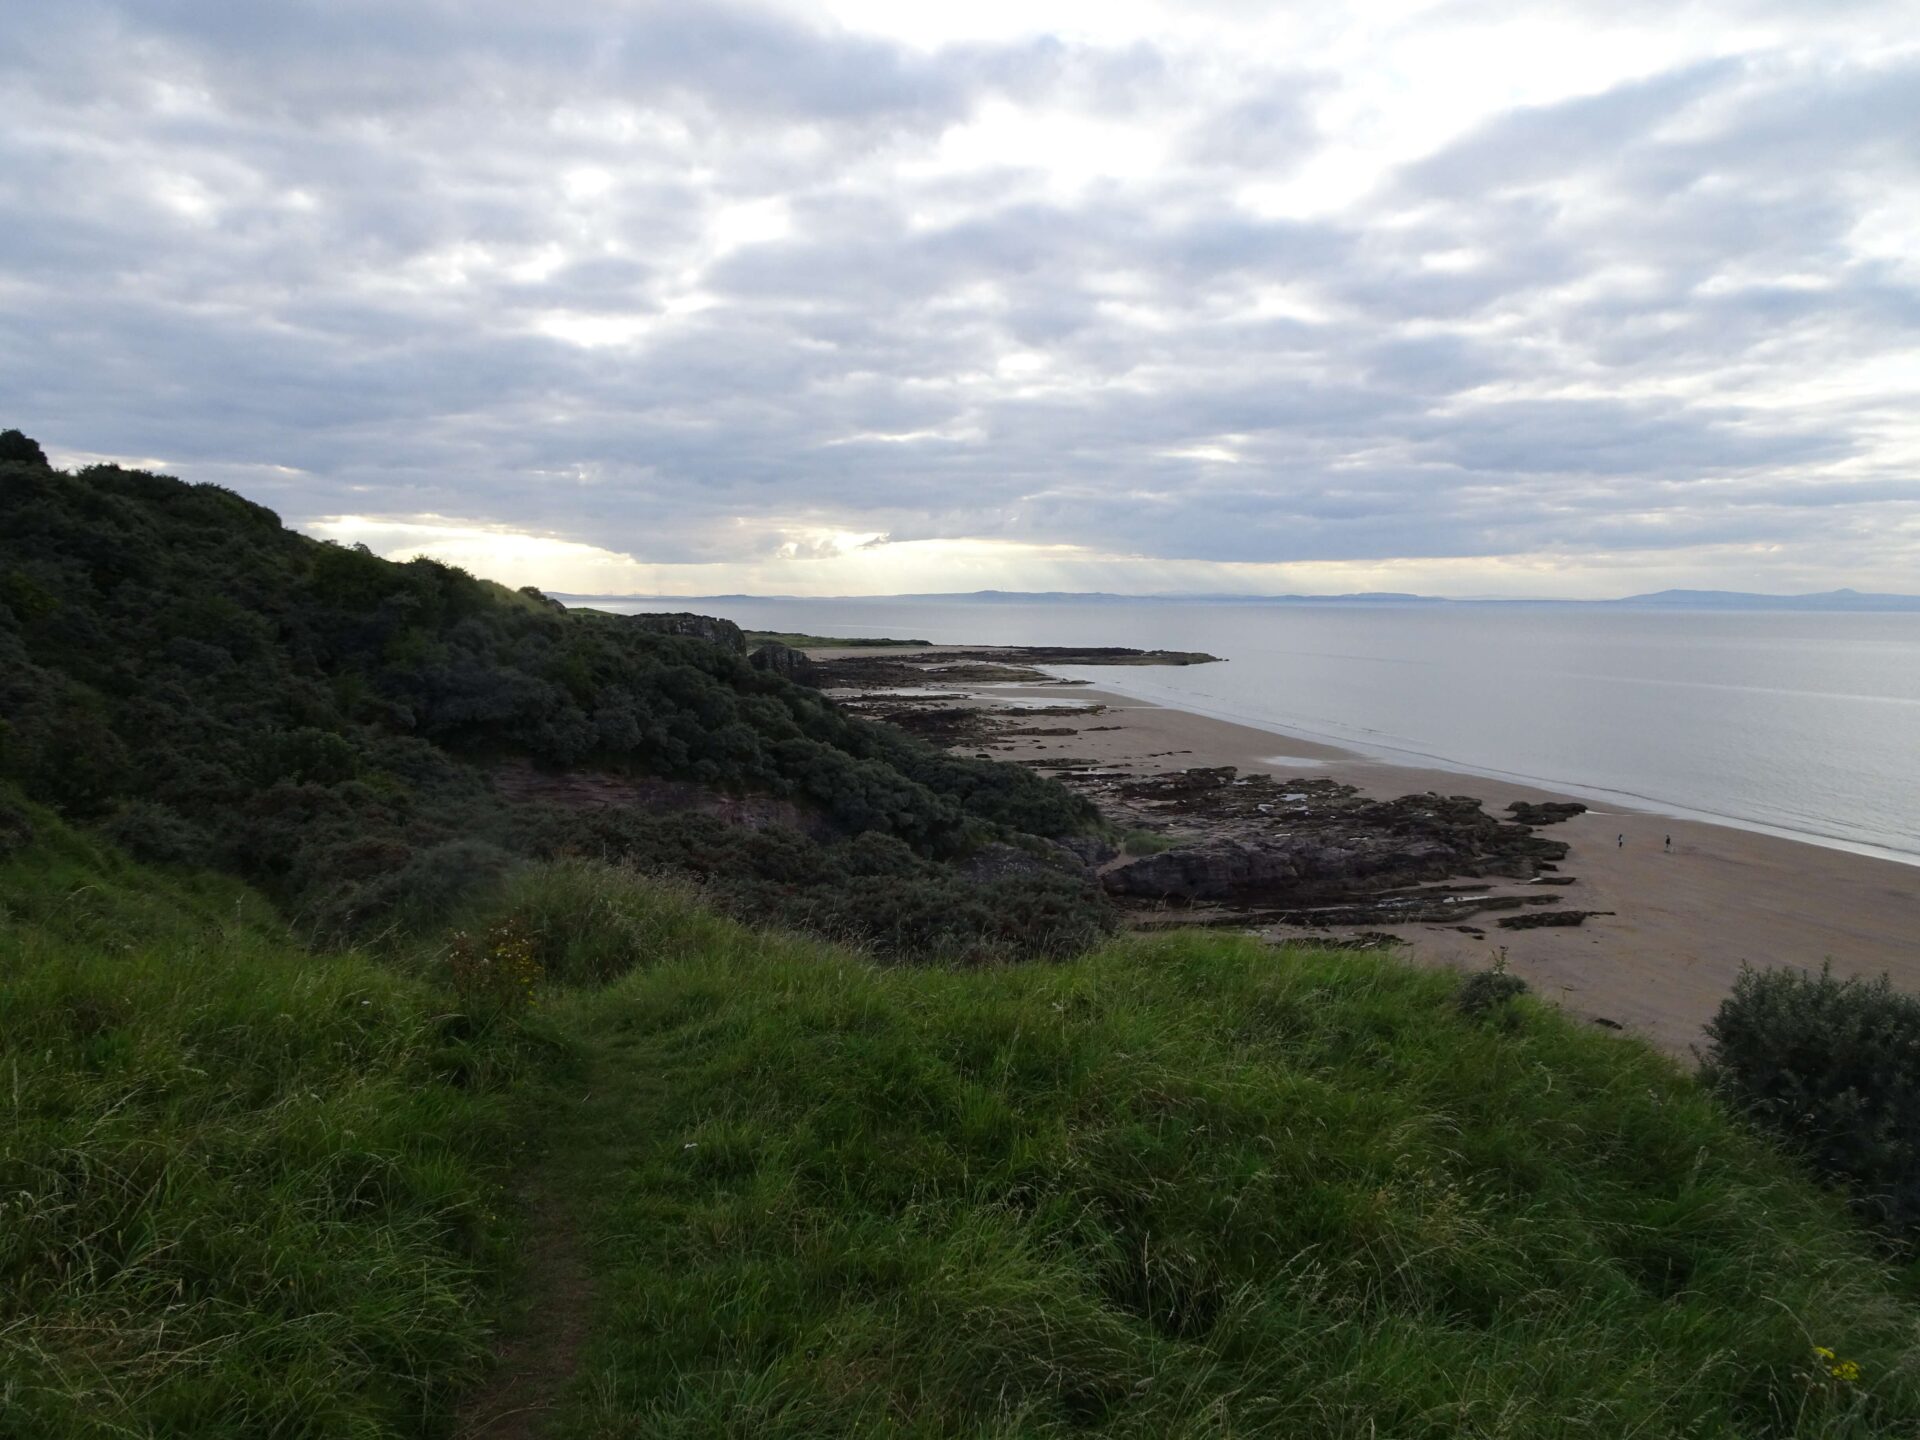 views on the start of the coastal walk from gullane to aberlady